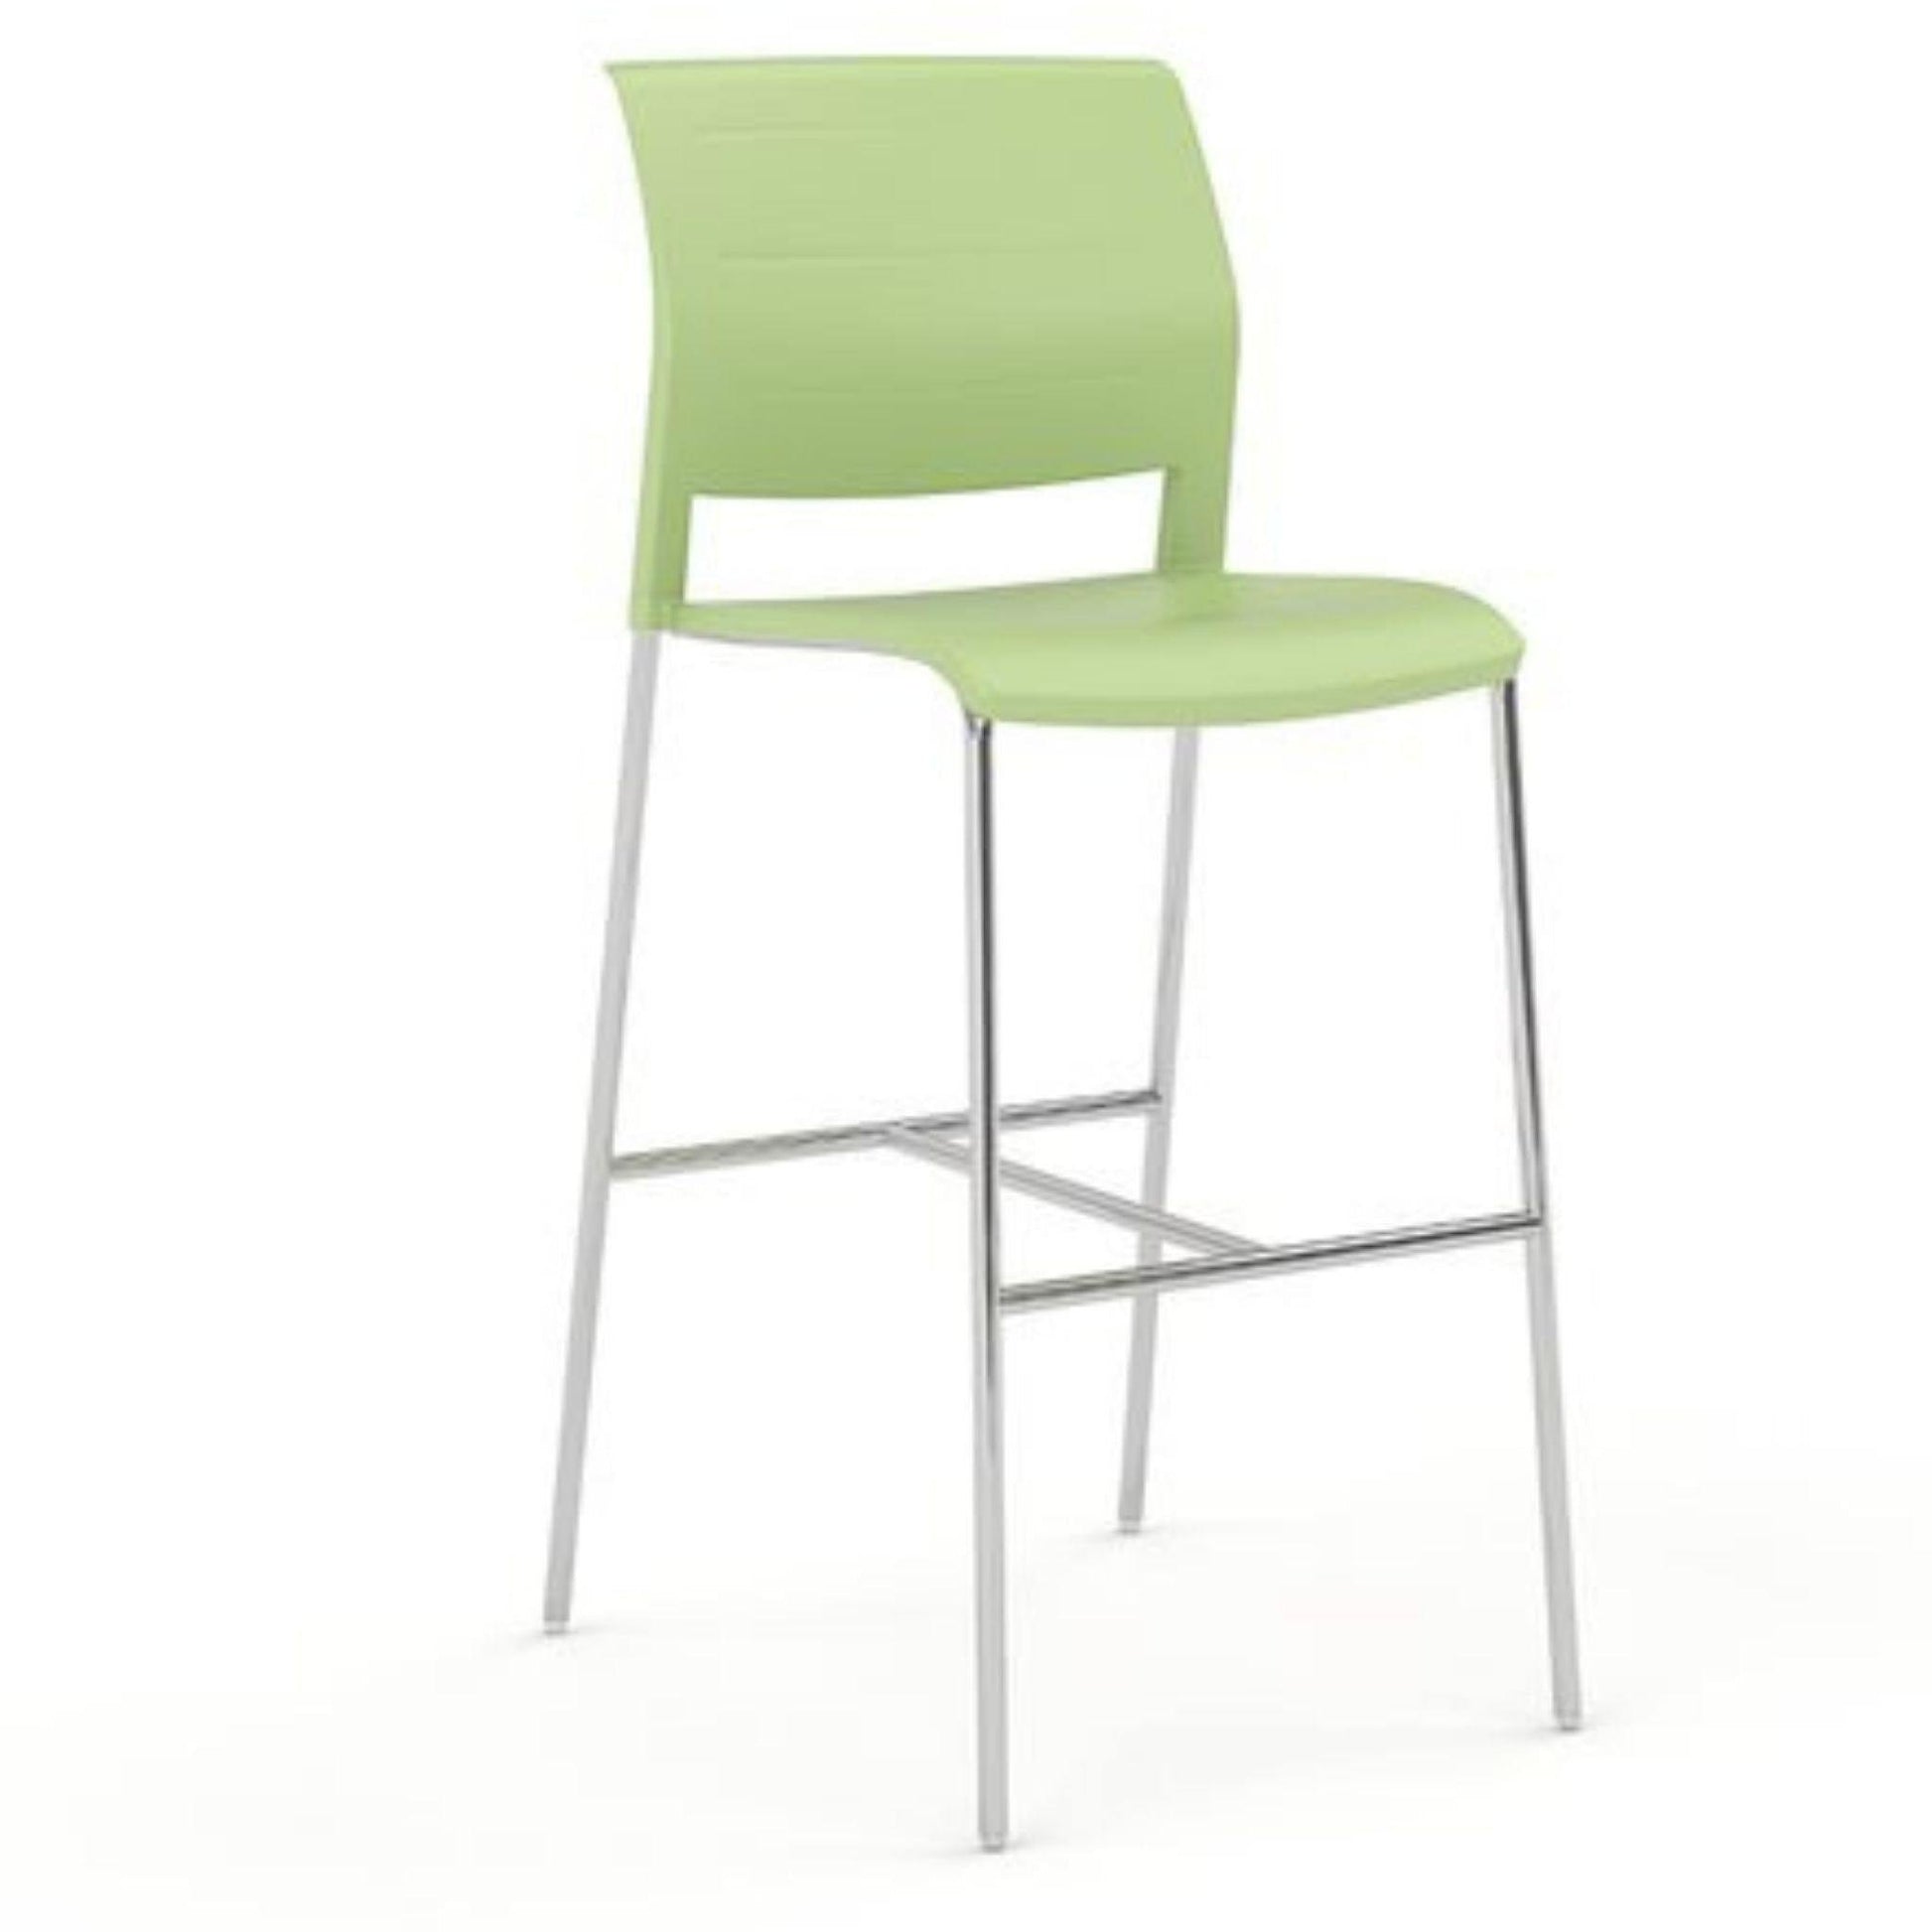 Game Office Bar Stool - Office Furniture Company 